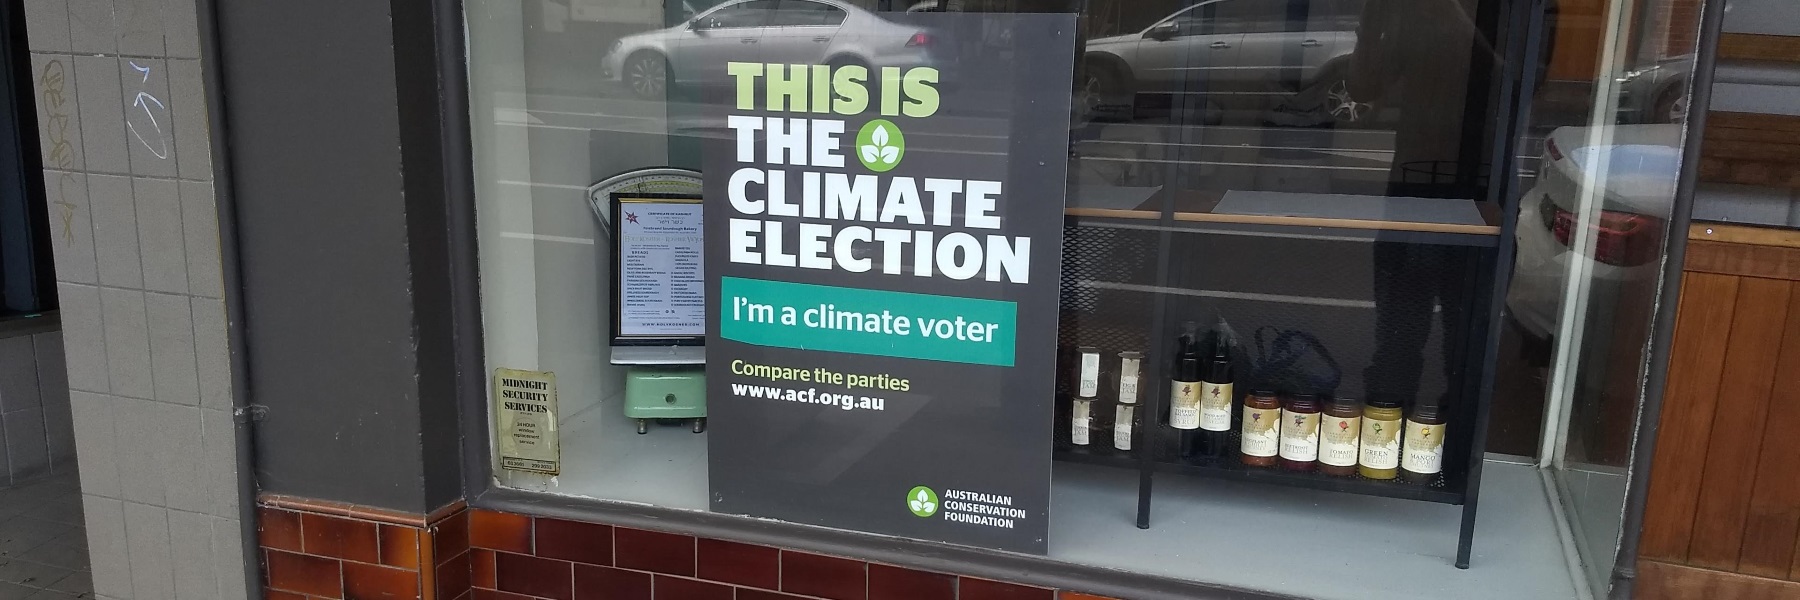 This Is The Climate Election ad